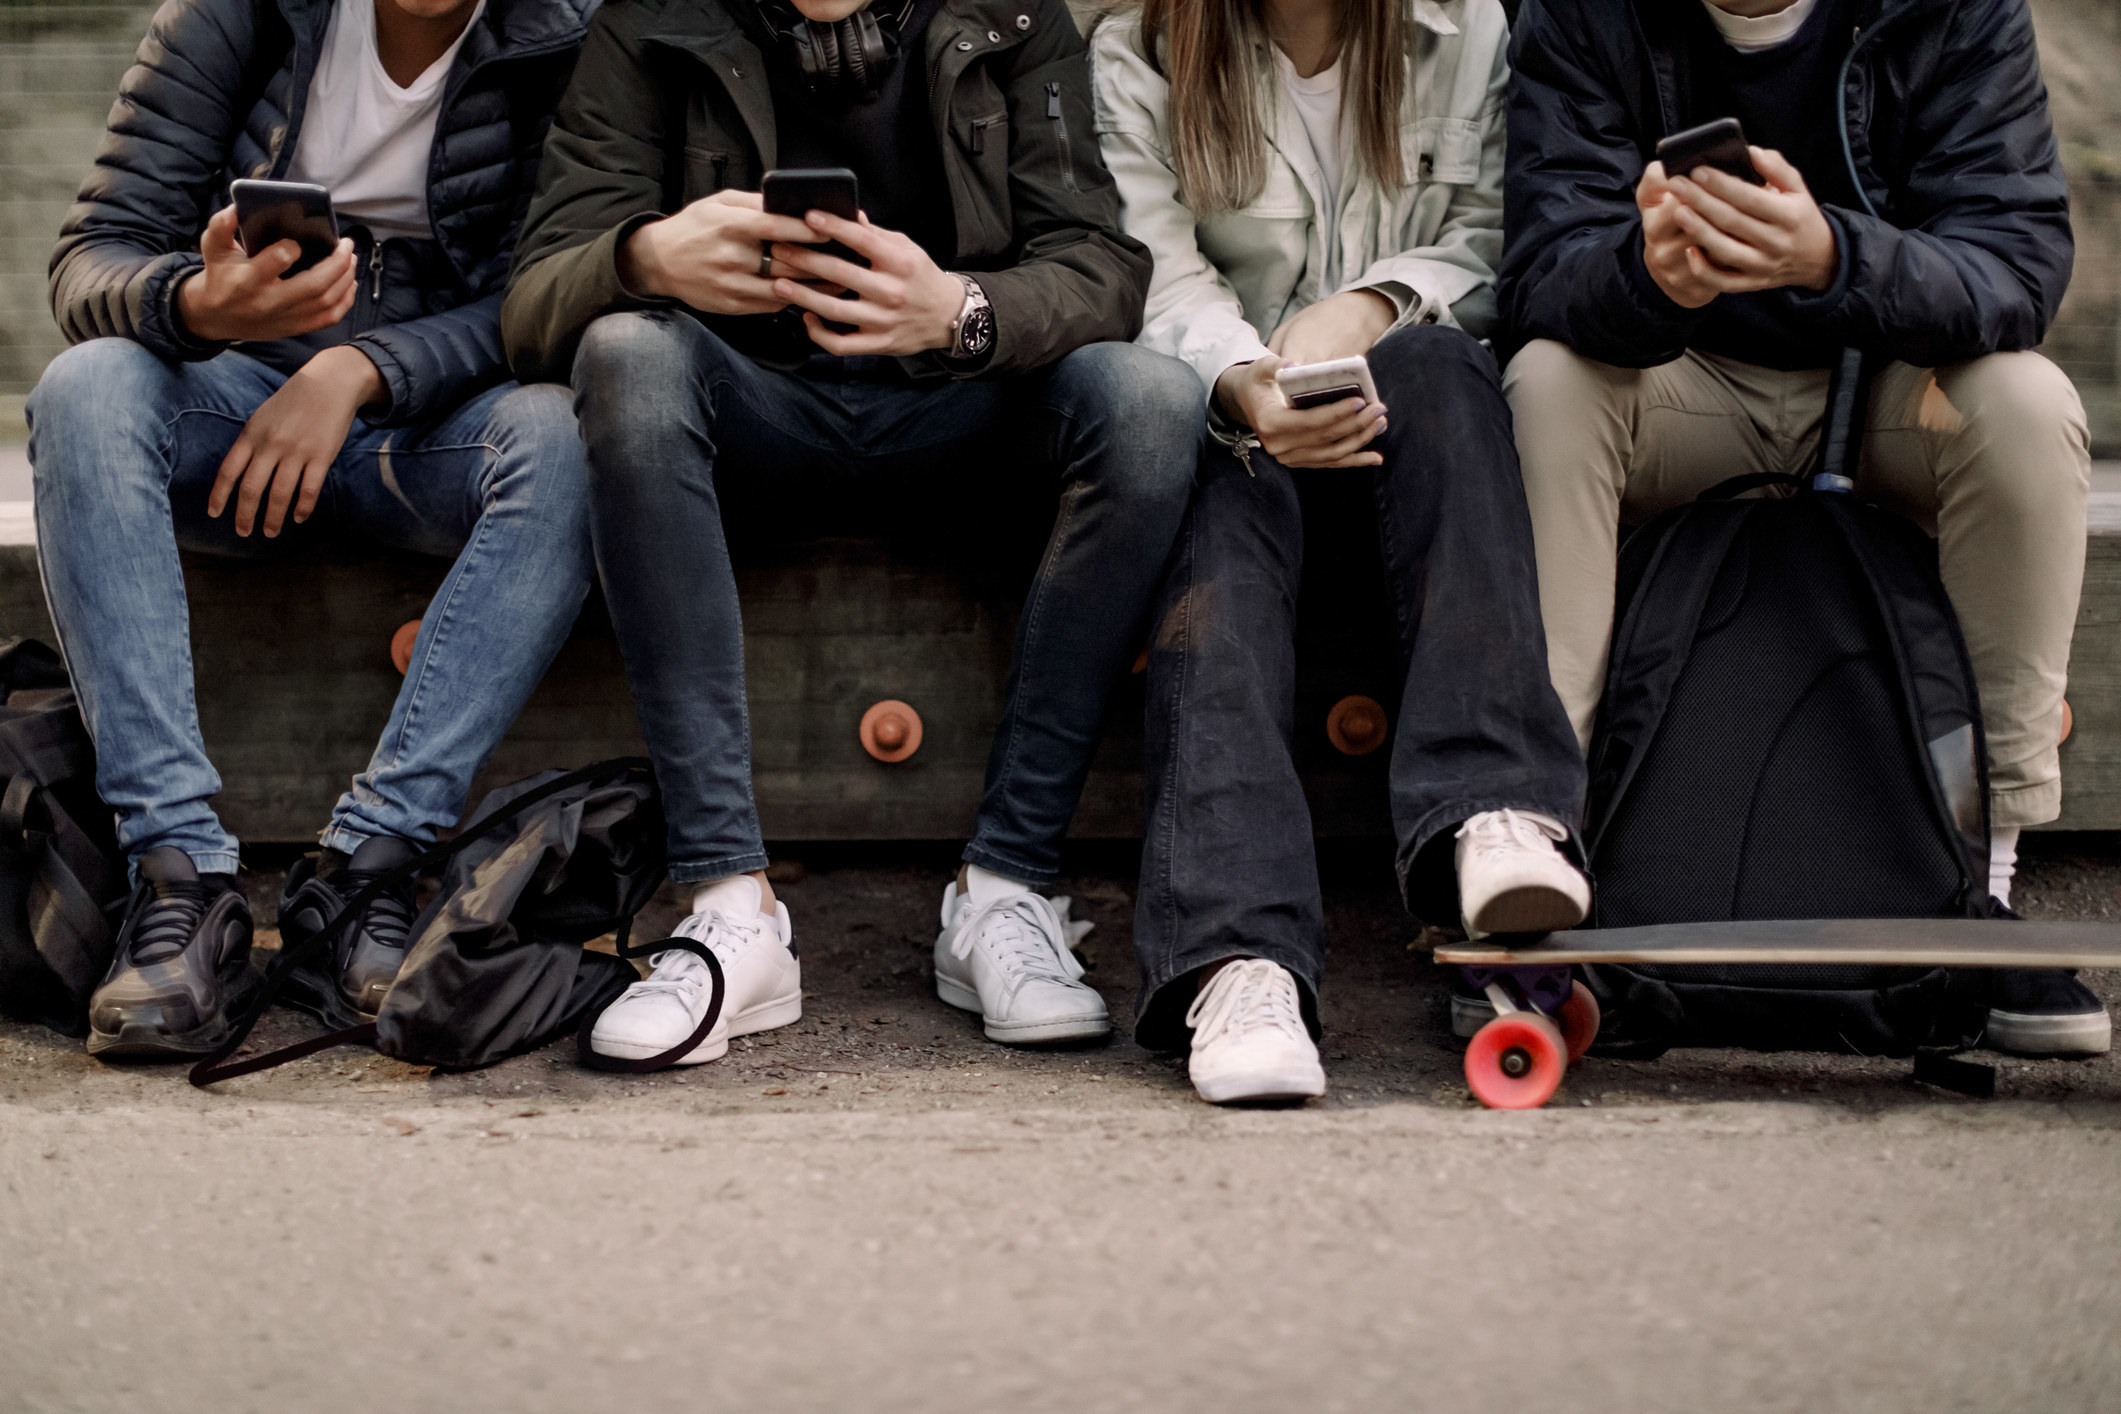 A group of teens, seen from the shoulders down, sitting together and hanging out outside looking at their phones